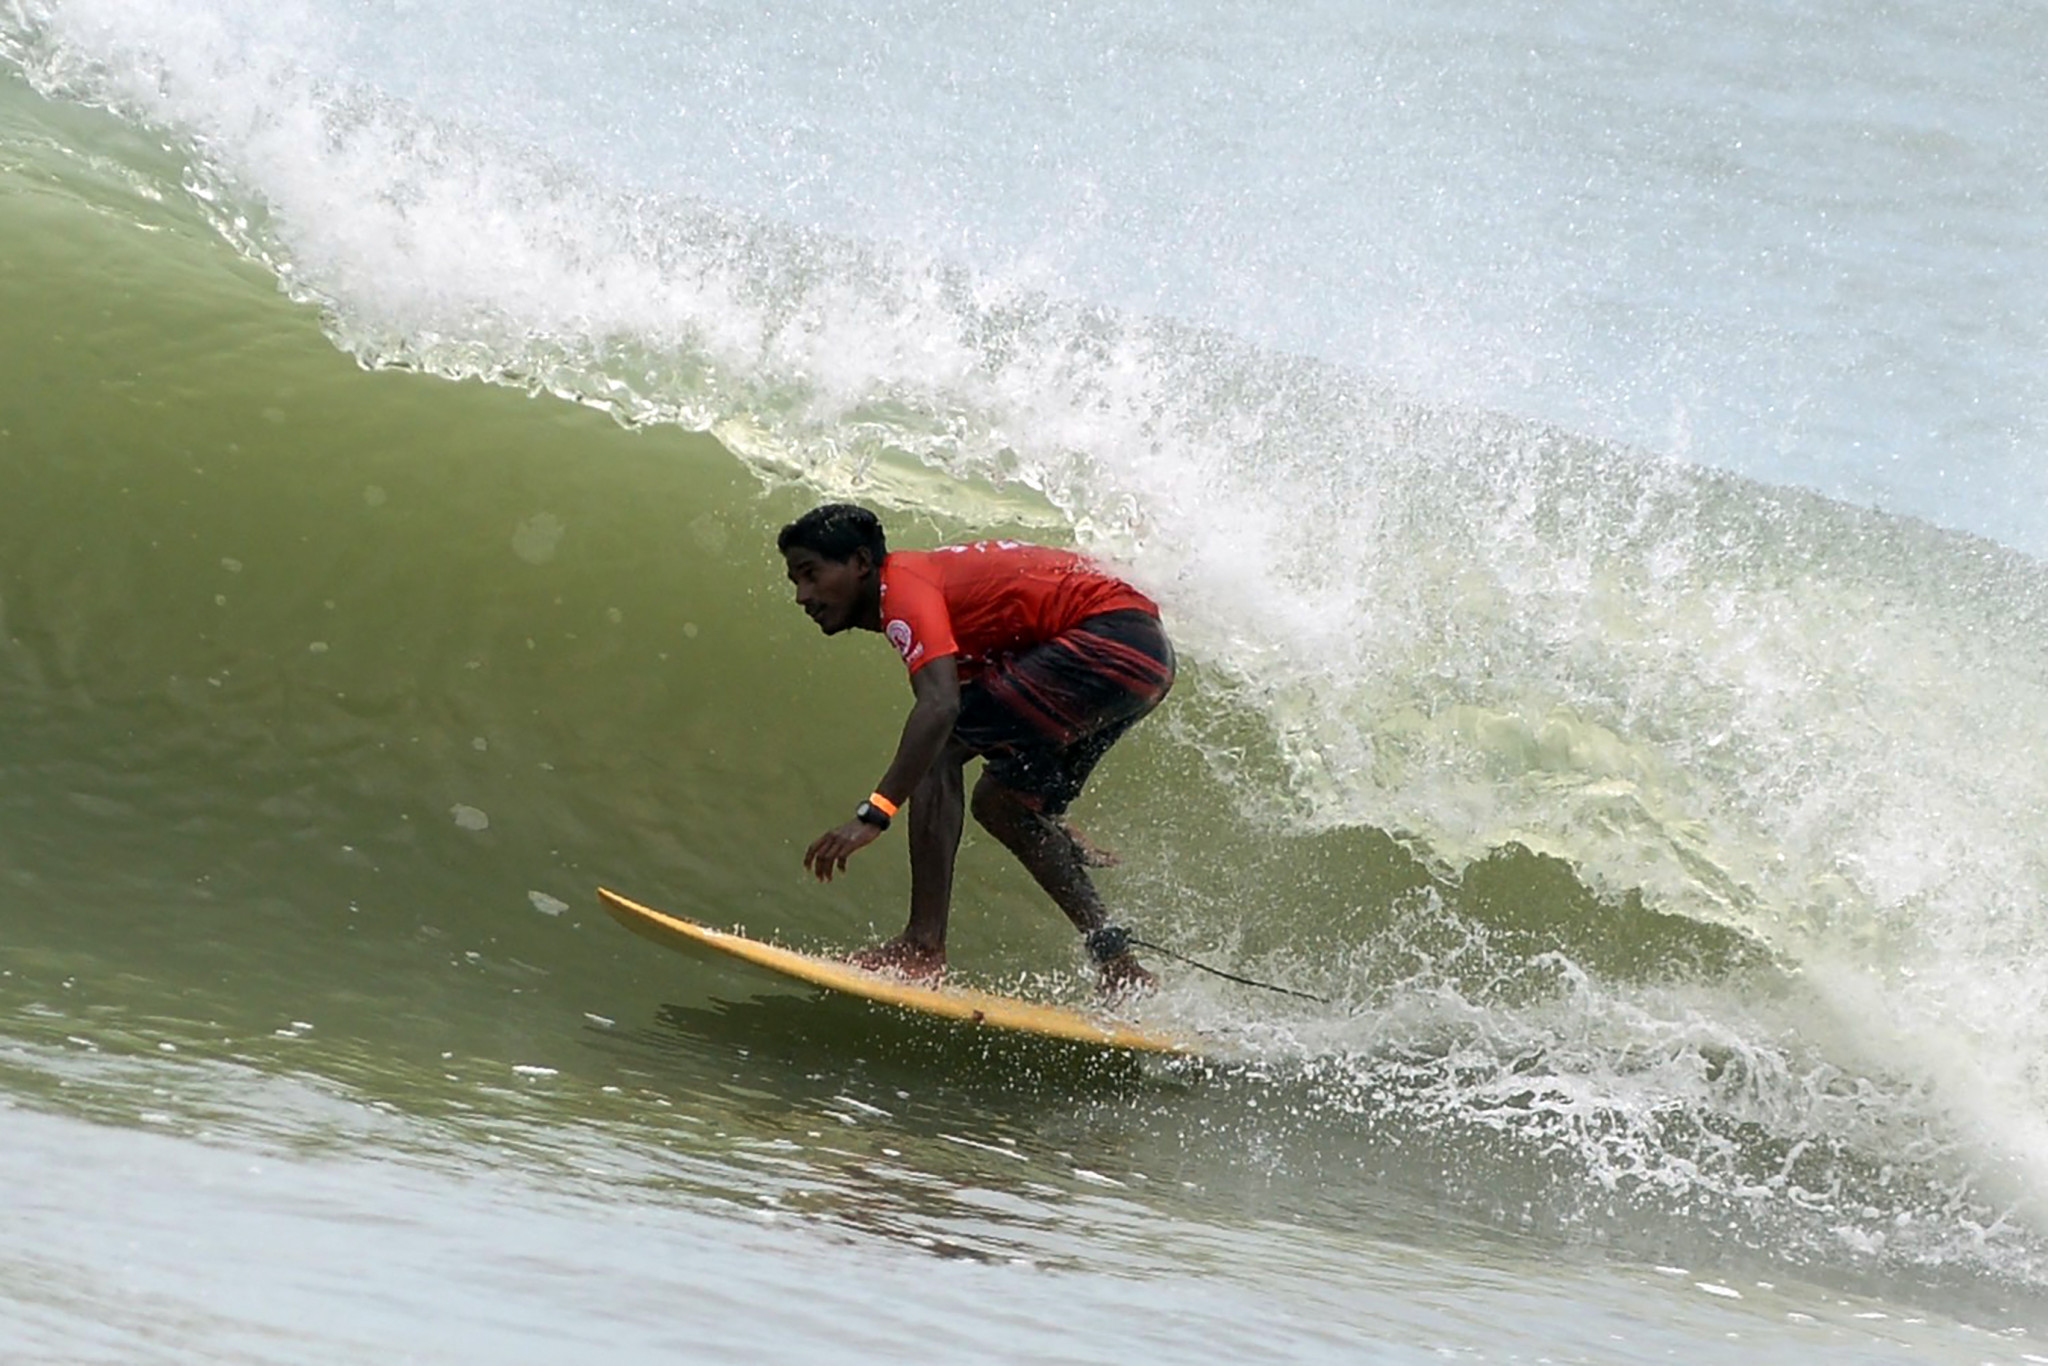 India to compete at World Surfing Games with hopes of Paris 2024 qualification